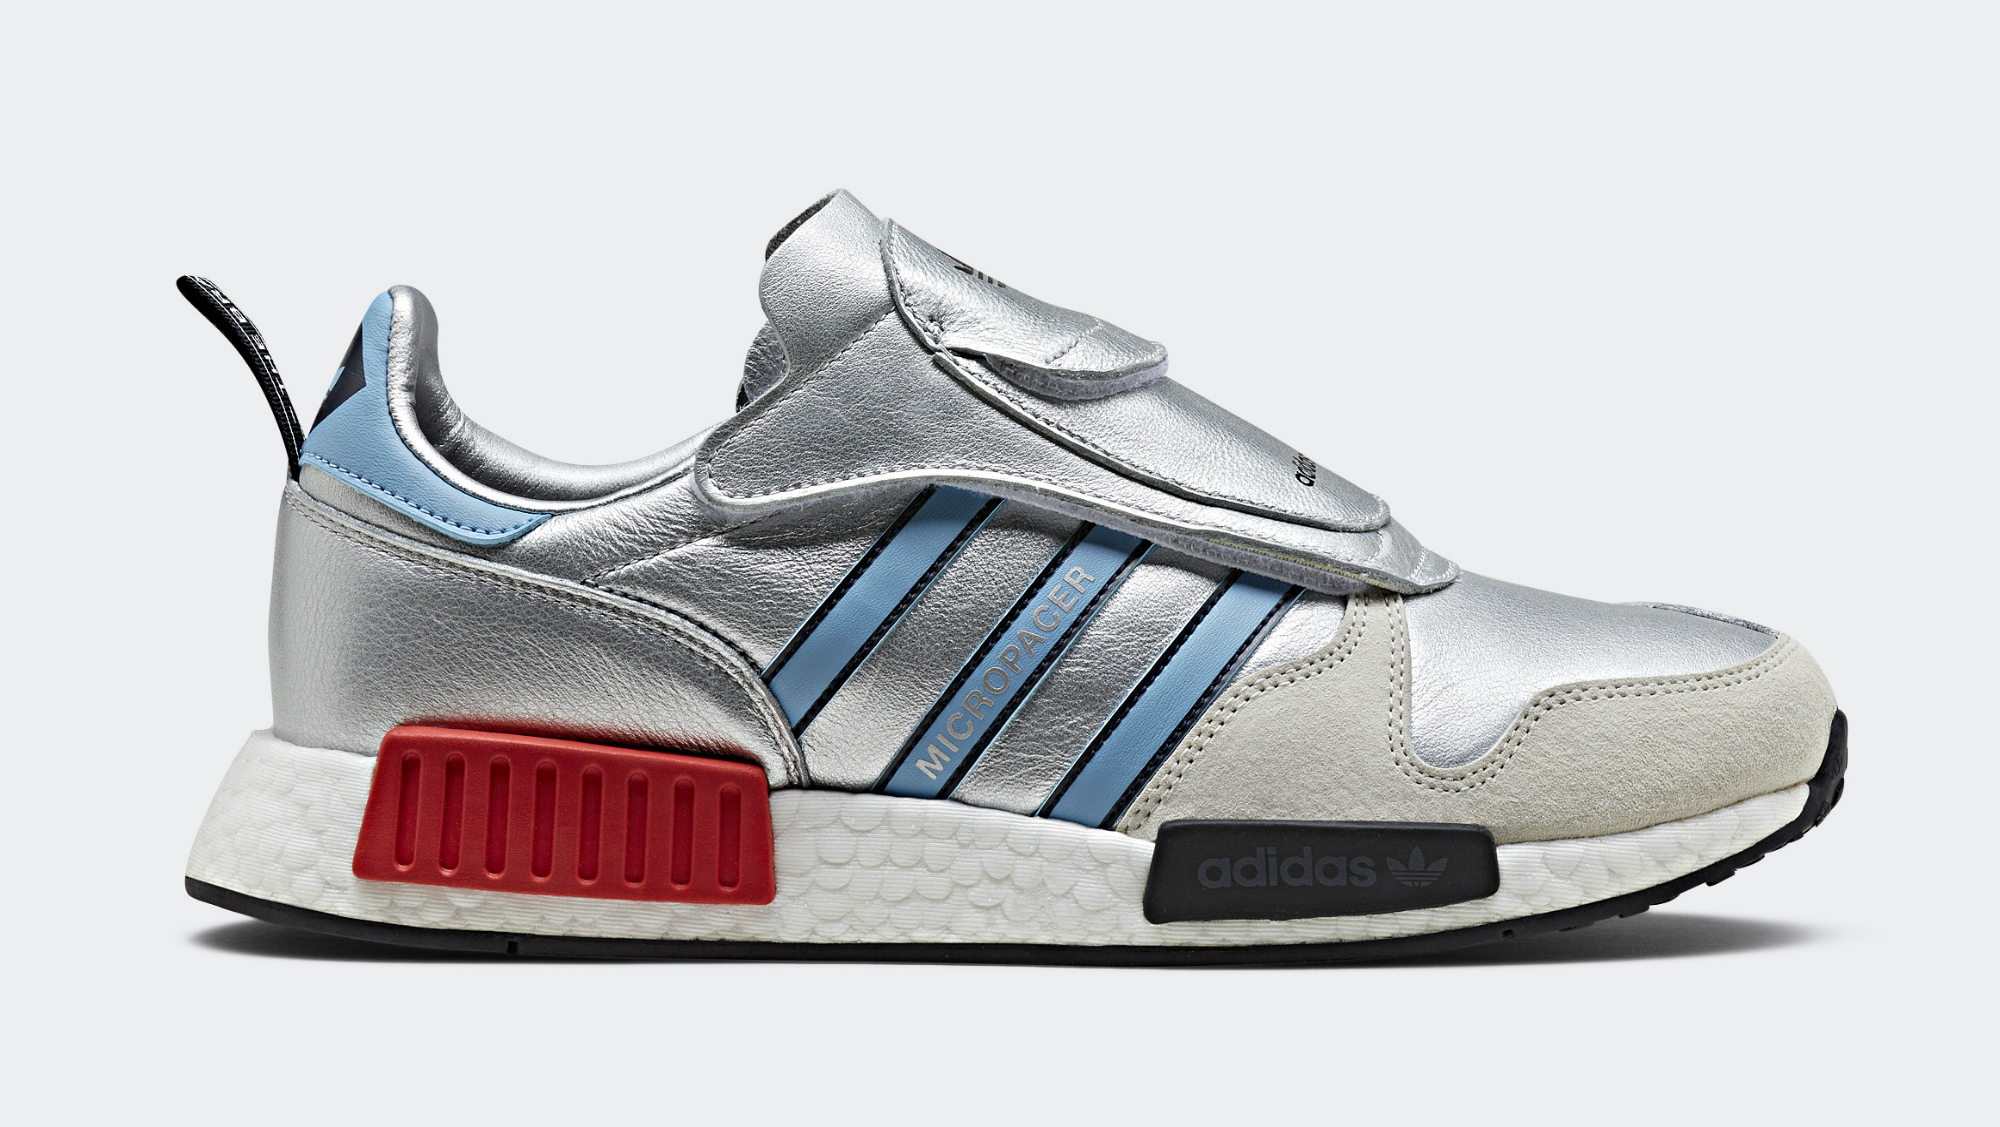 Neem een ​​bad ingenieur Pogo stick sprong Adidas Micropacer x R1 Silver Metallic/Light Blue/Cloud White | Adidas |  Release Dates, Sneaker Calendar, Prices & Collaborations